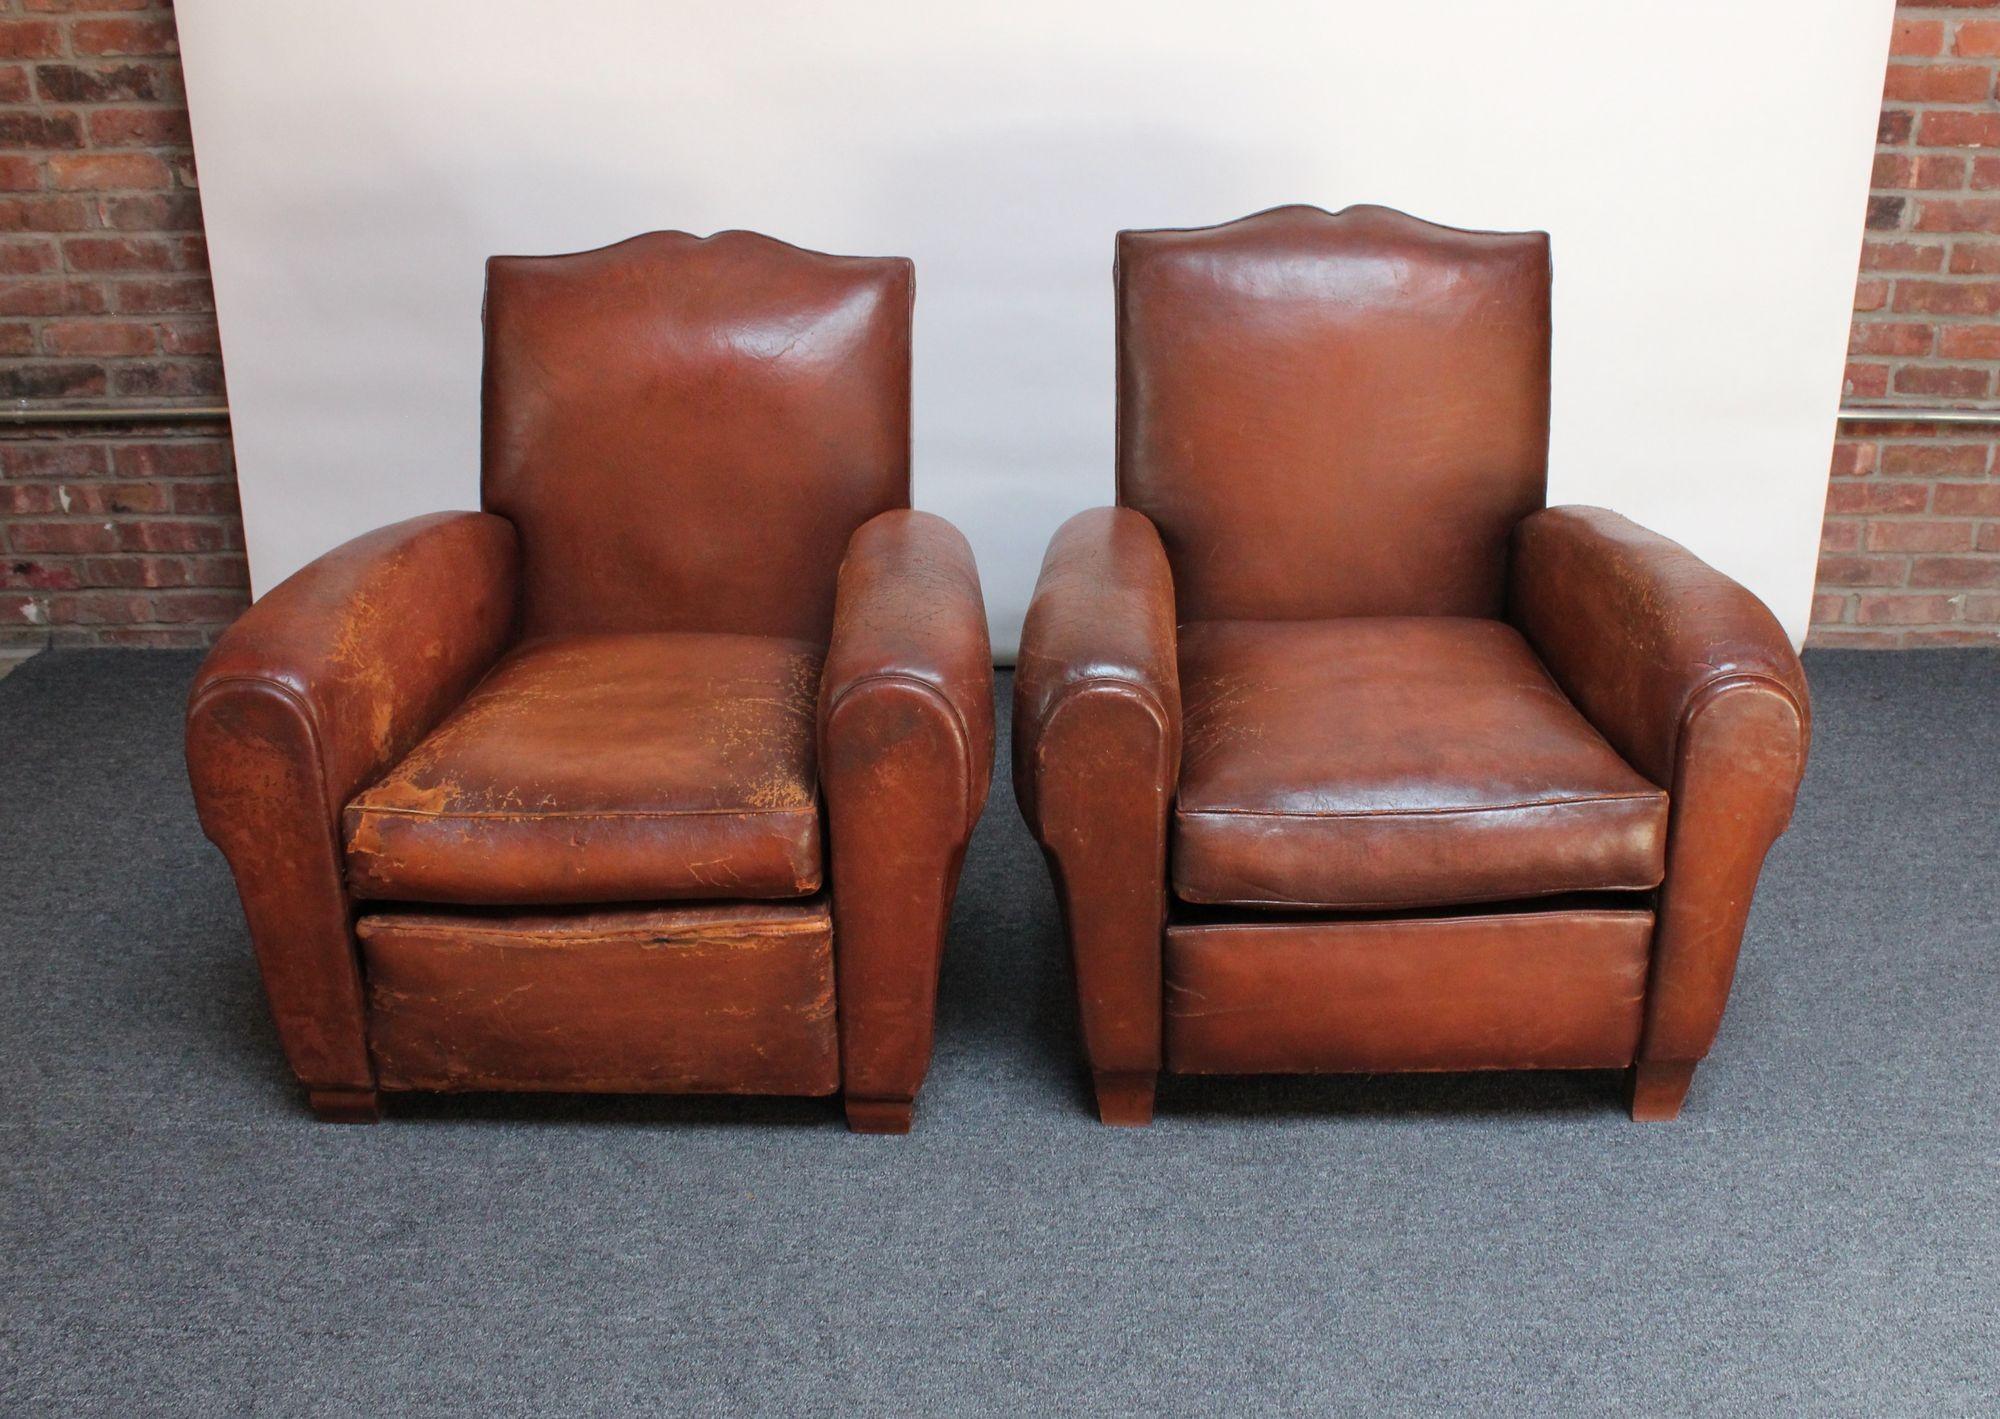 Robust, handsome pair of 1930s French club chairs sourced in the south of France in supple sheep hide leather with 'mustache' back and nailhead decoration to the back border.
Presented as 'his and hers,' given the slight proportional differences